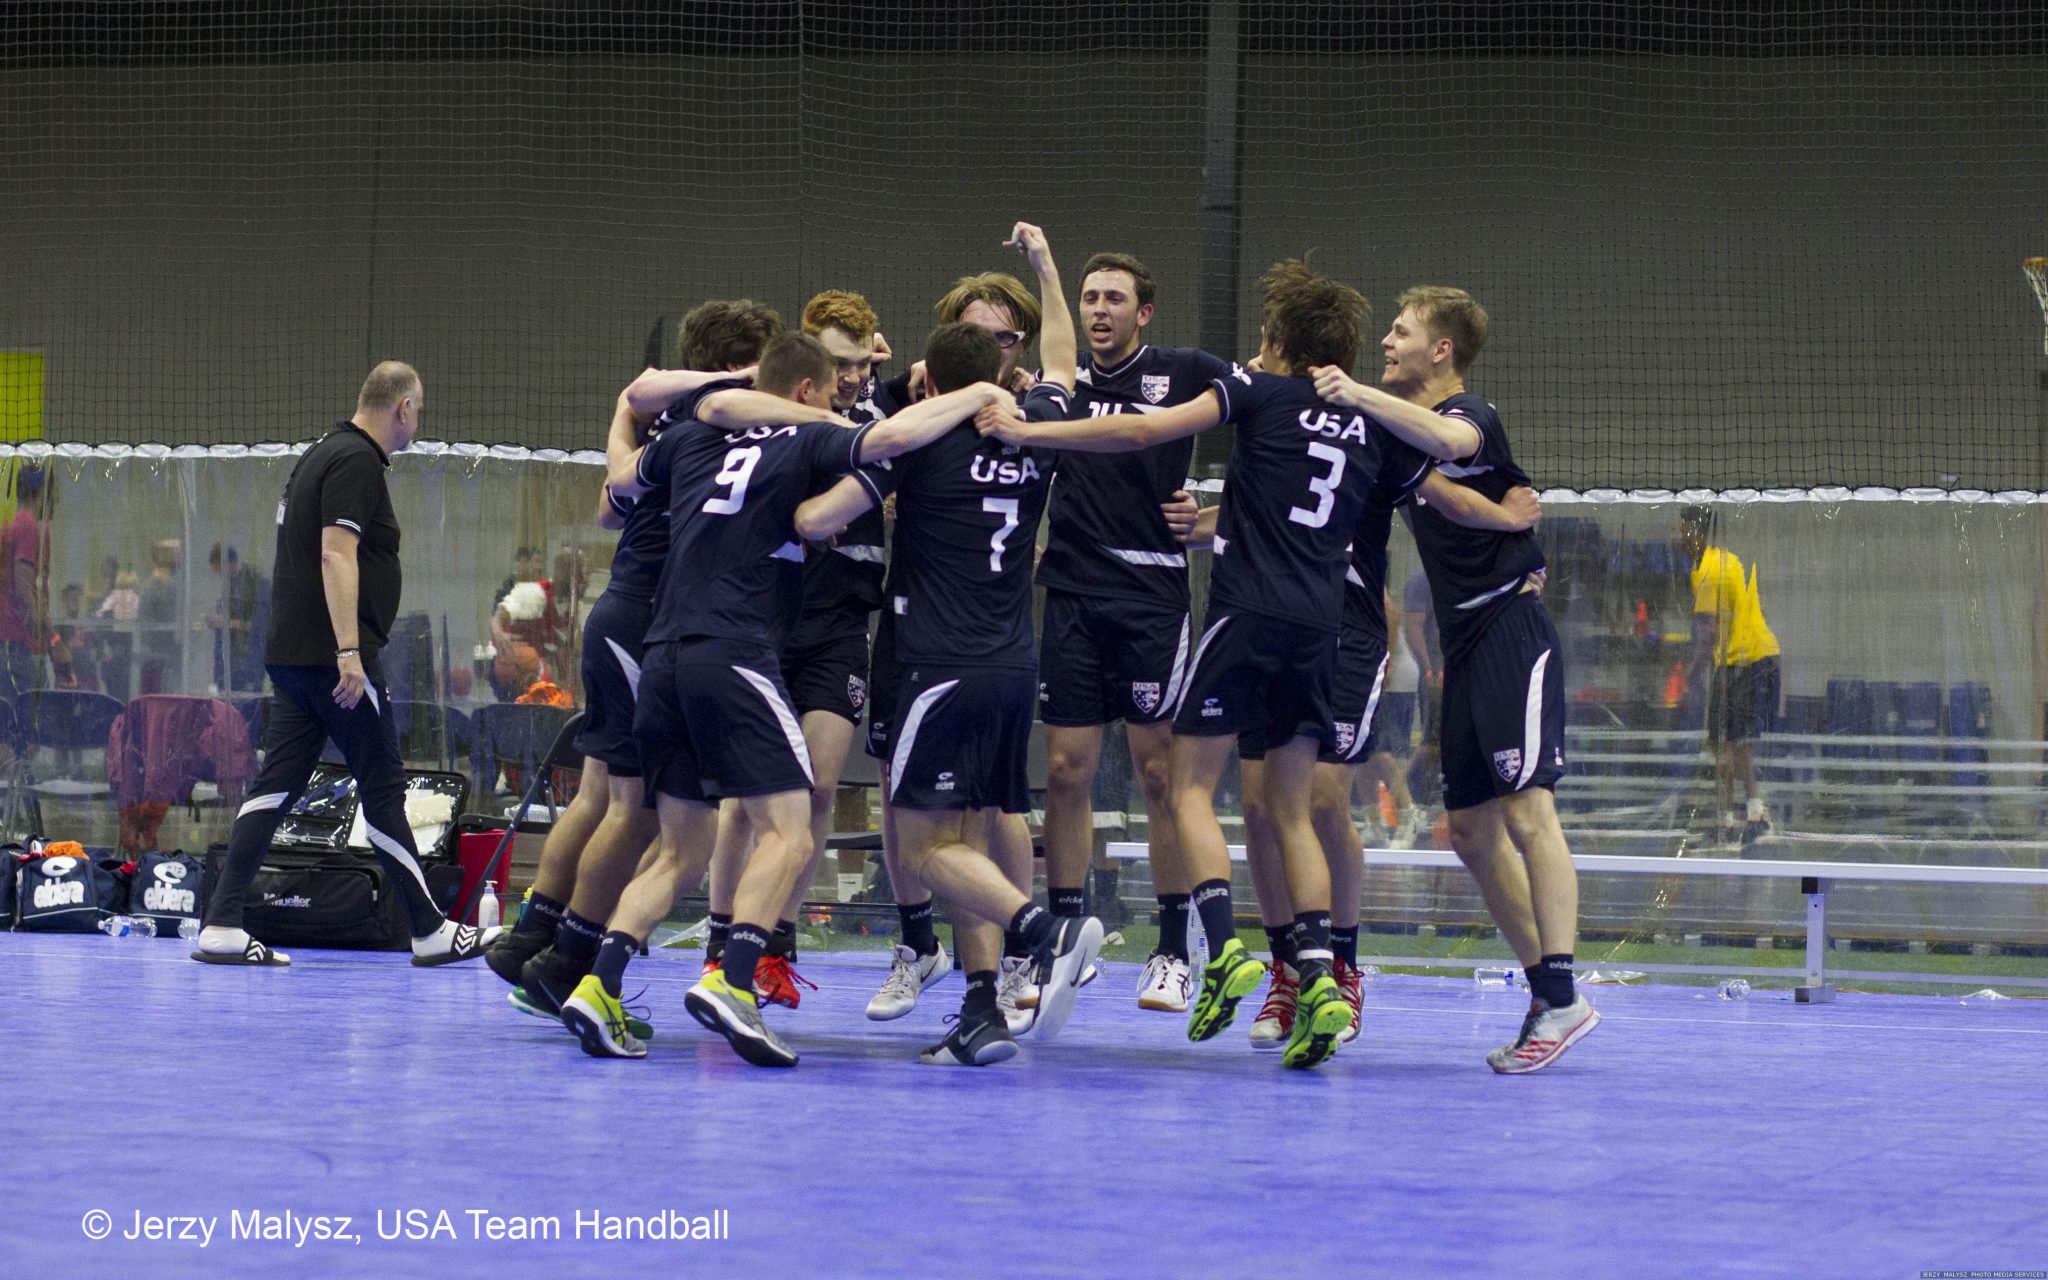 USA Team Handball celebrates beating Canada to qualify for the Pan American Games in 2019.